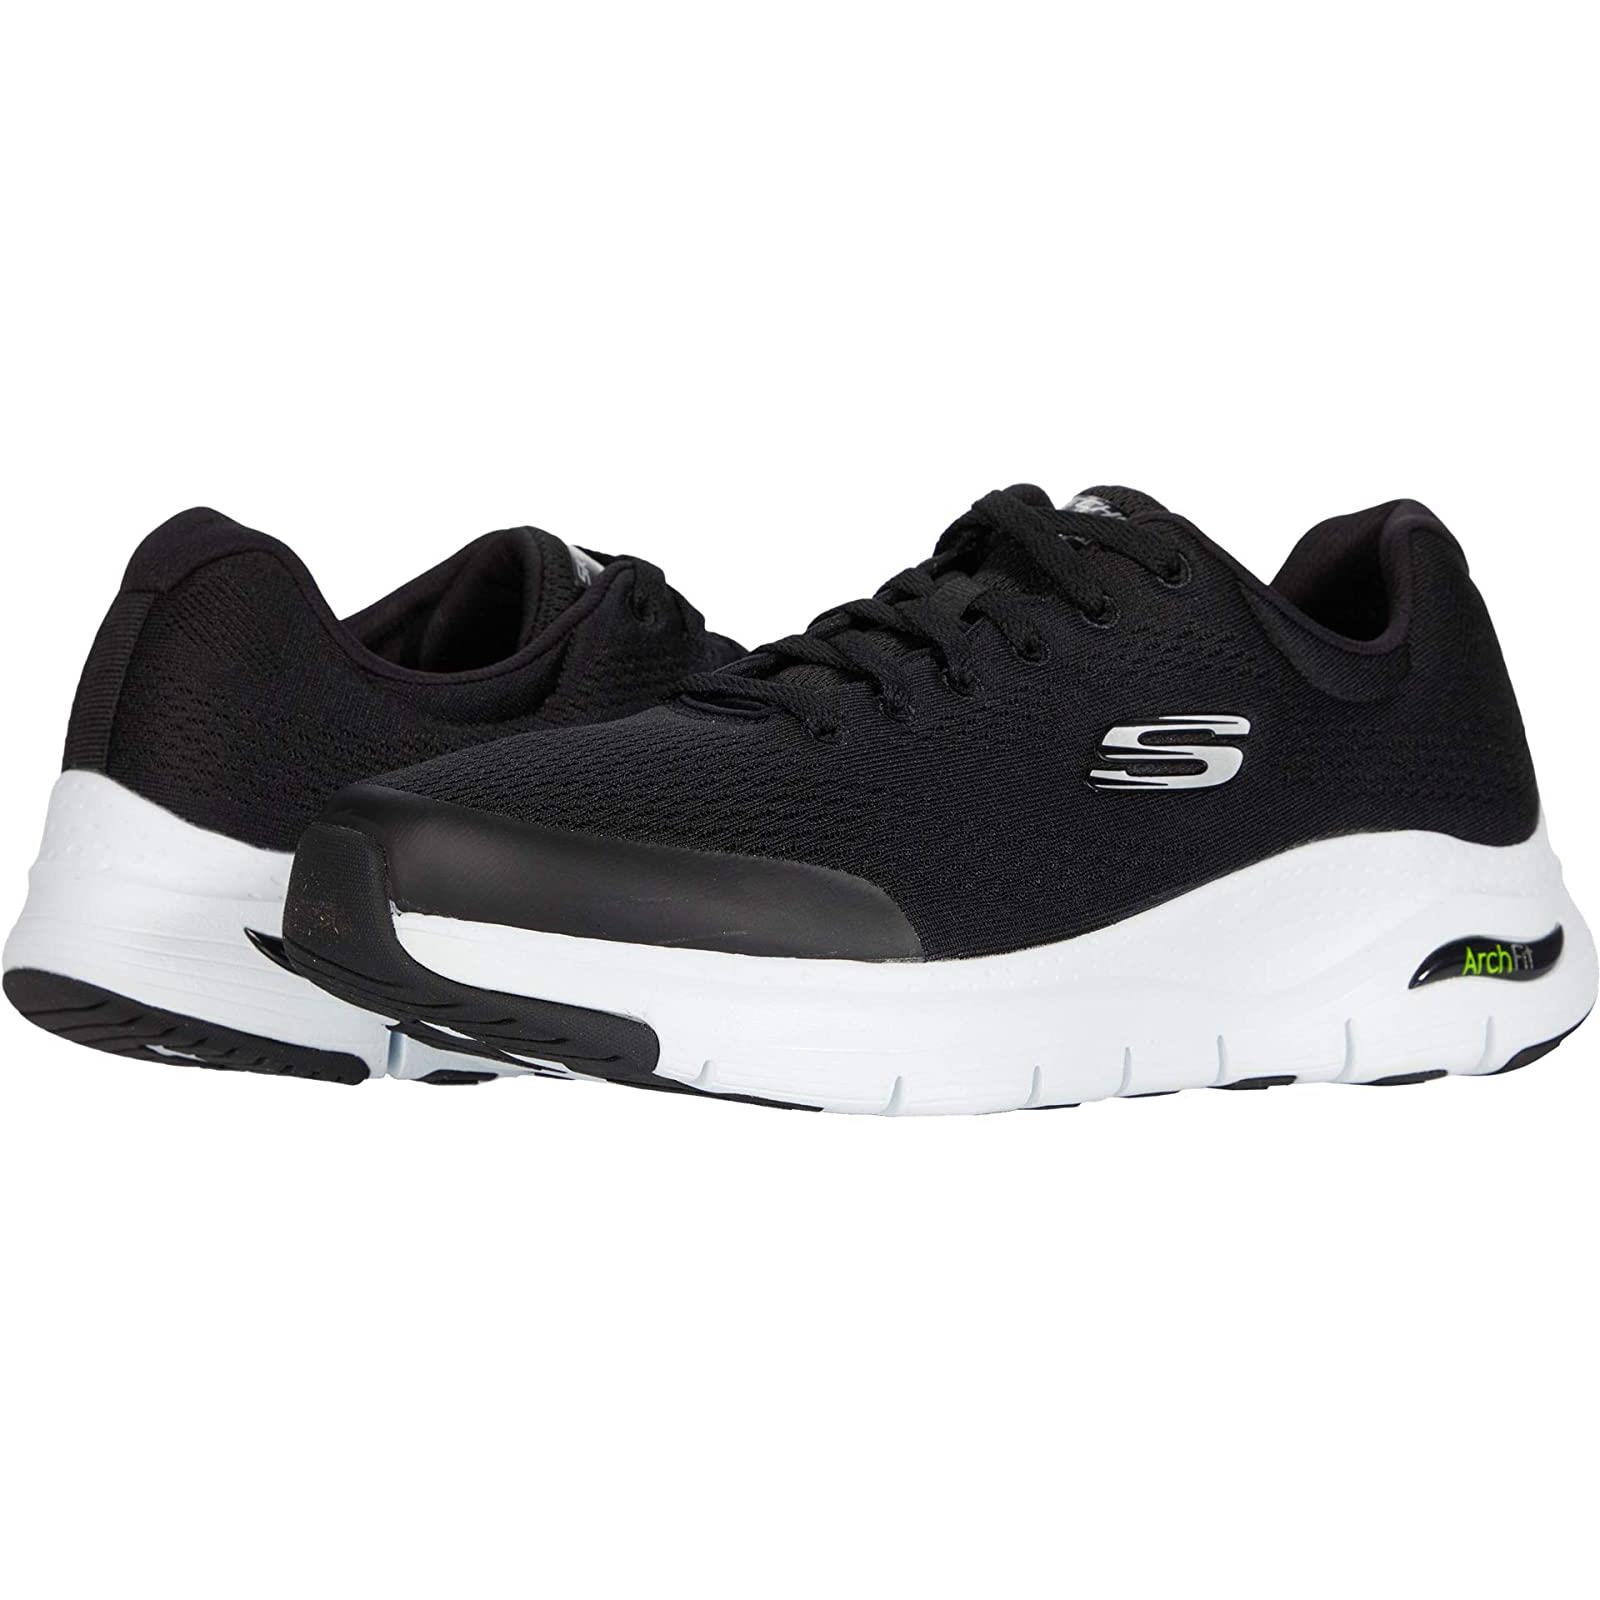 Man`s Sneakers Athletic Shoes Skechers Arch Fit Black/White